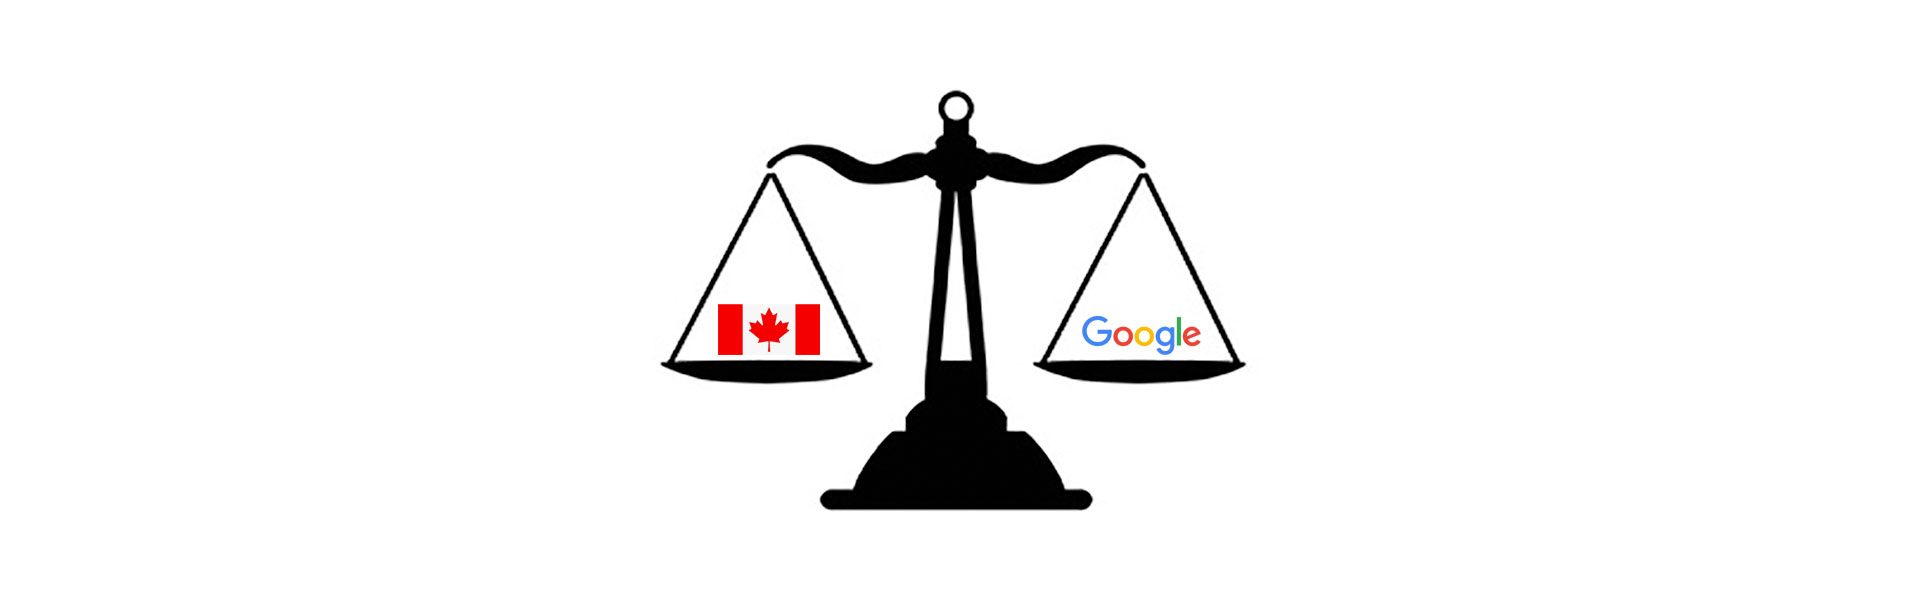 Scales of justice between Google and Canada